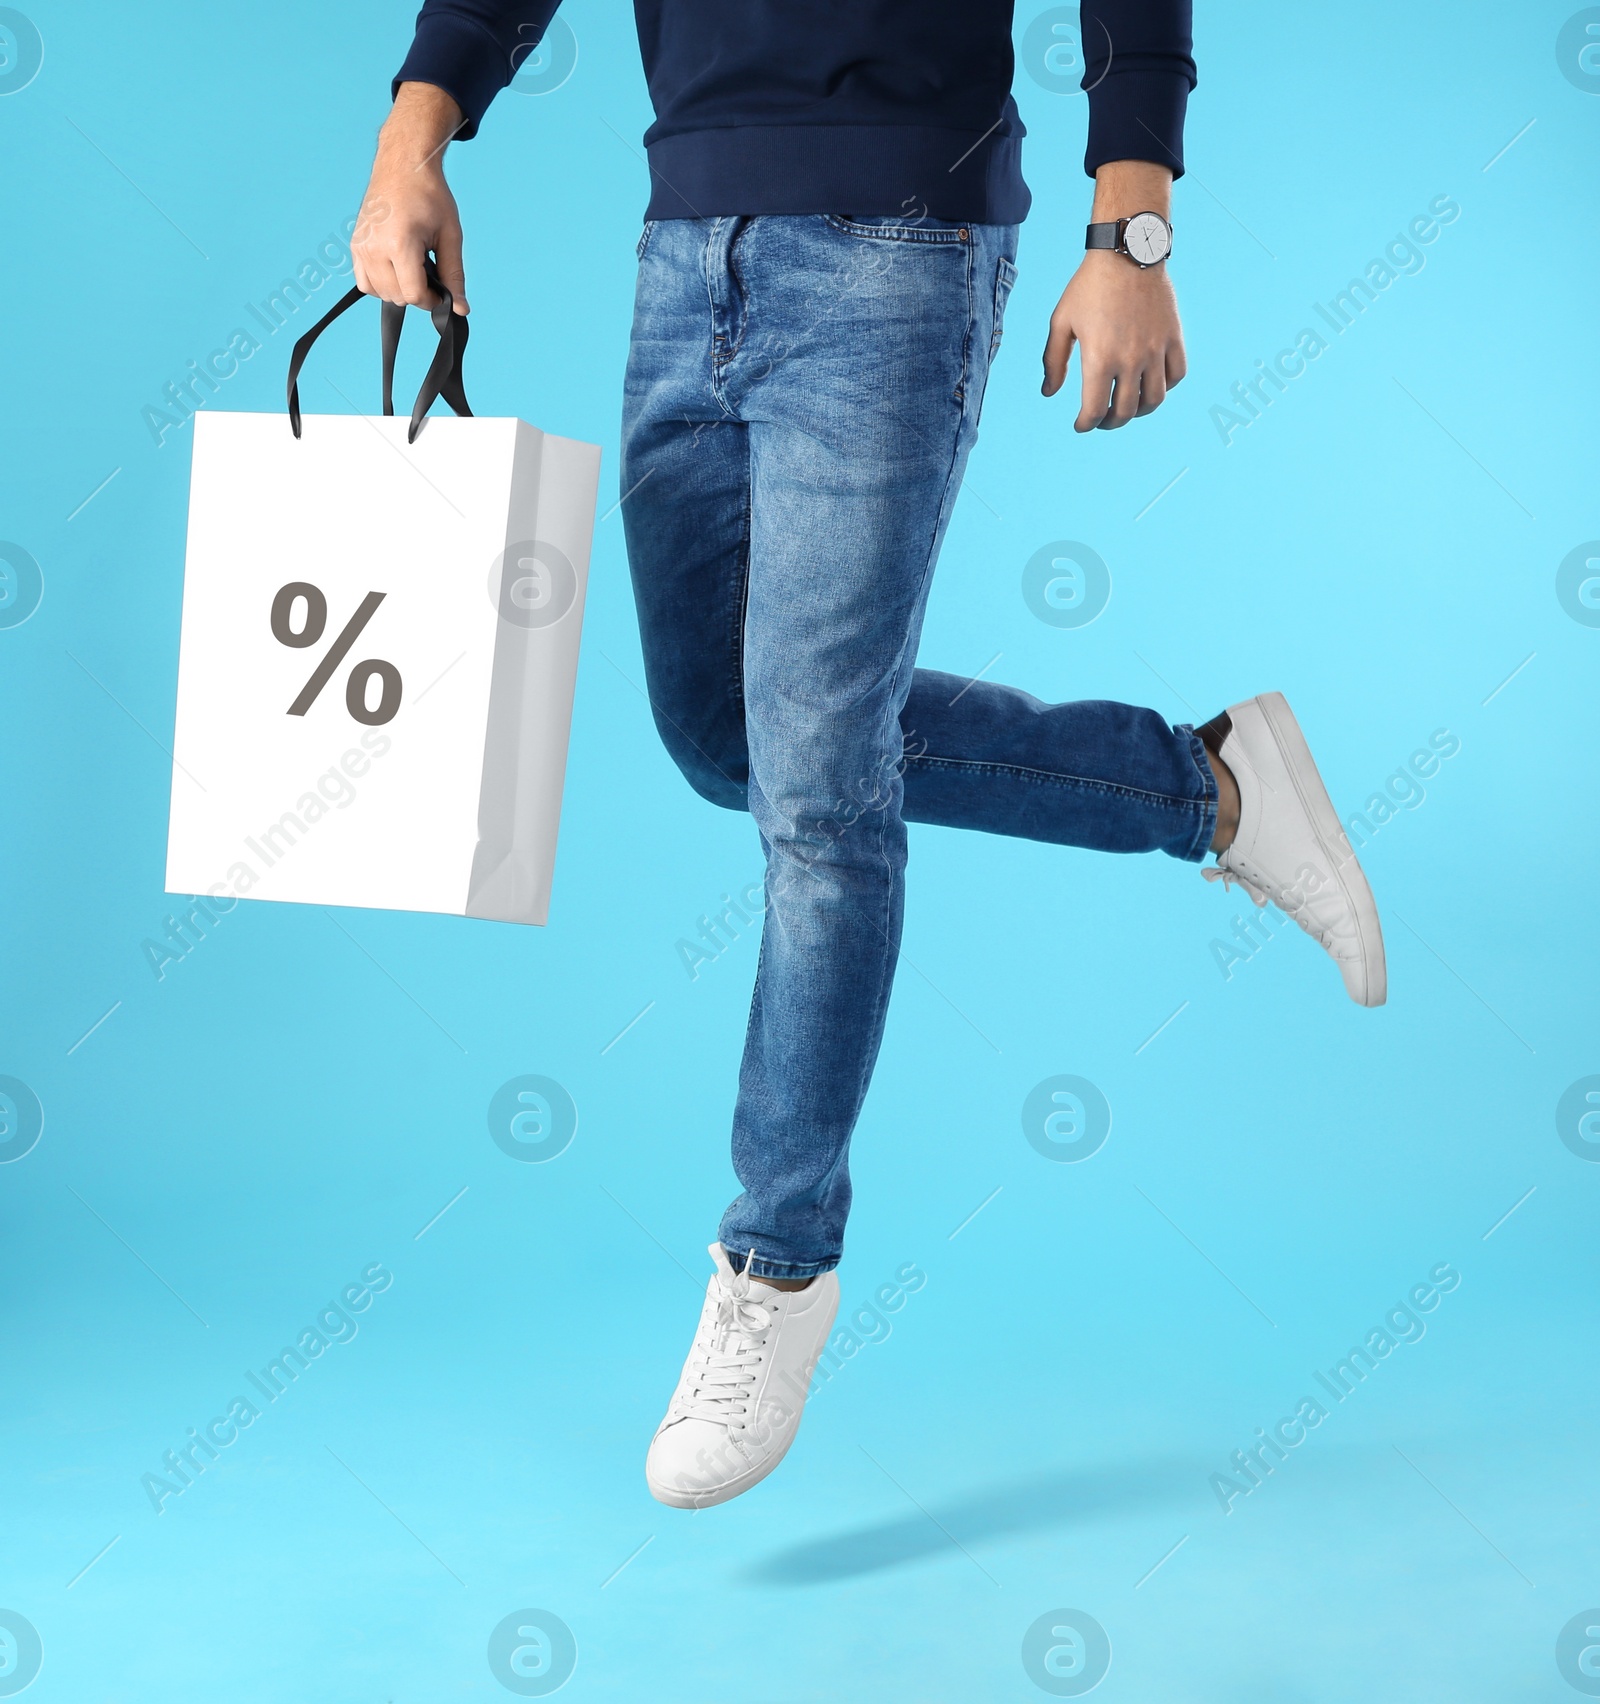 Image of Discount, sale, offer. Man jumping with shopping bag against light blue background, closeup. Paper bag with percent sign